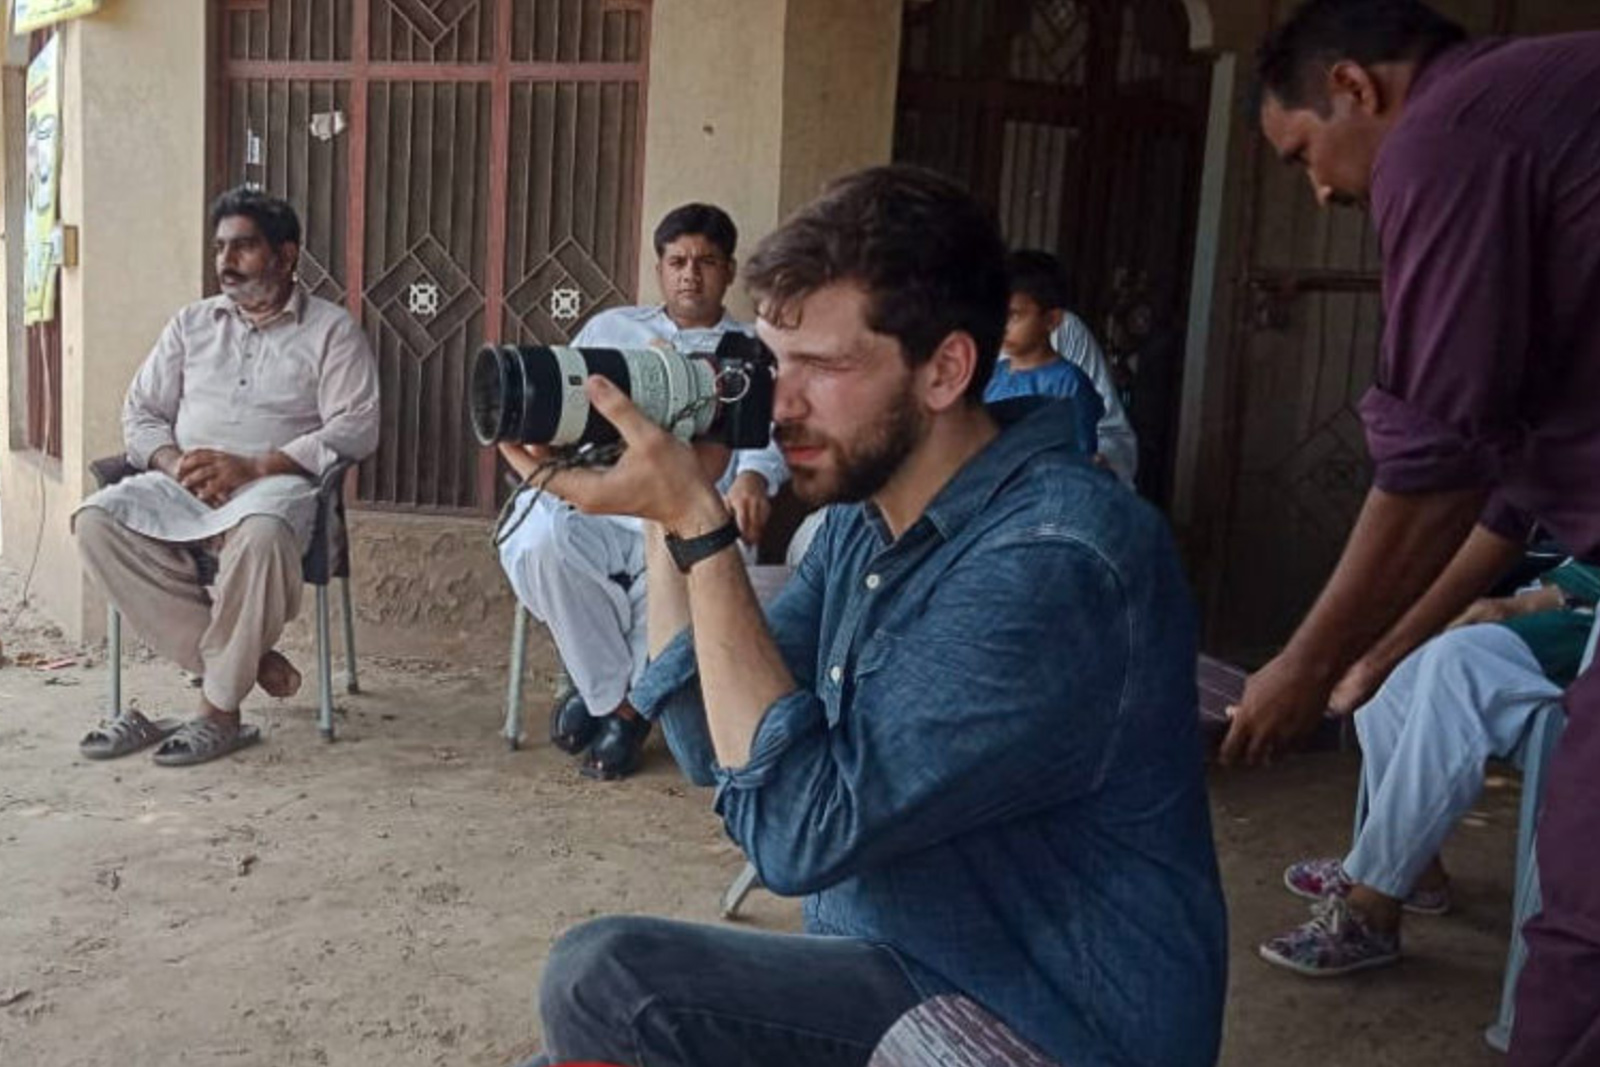 Krahmer with a camera amongst a group of men watching.